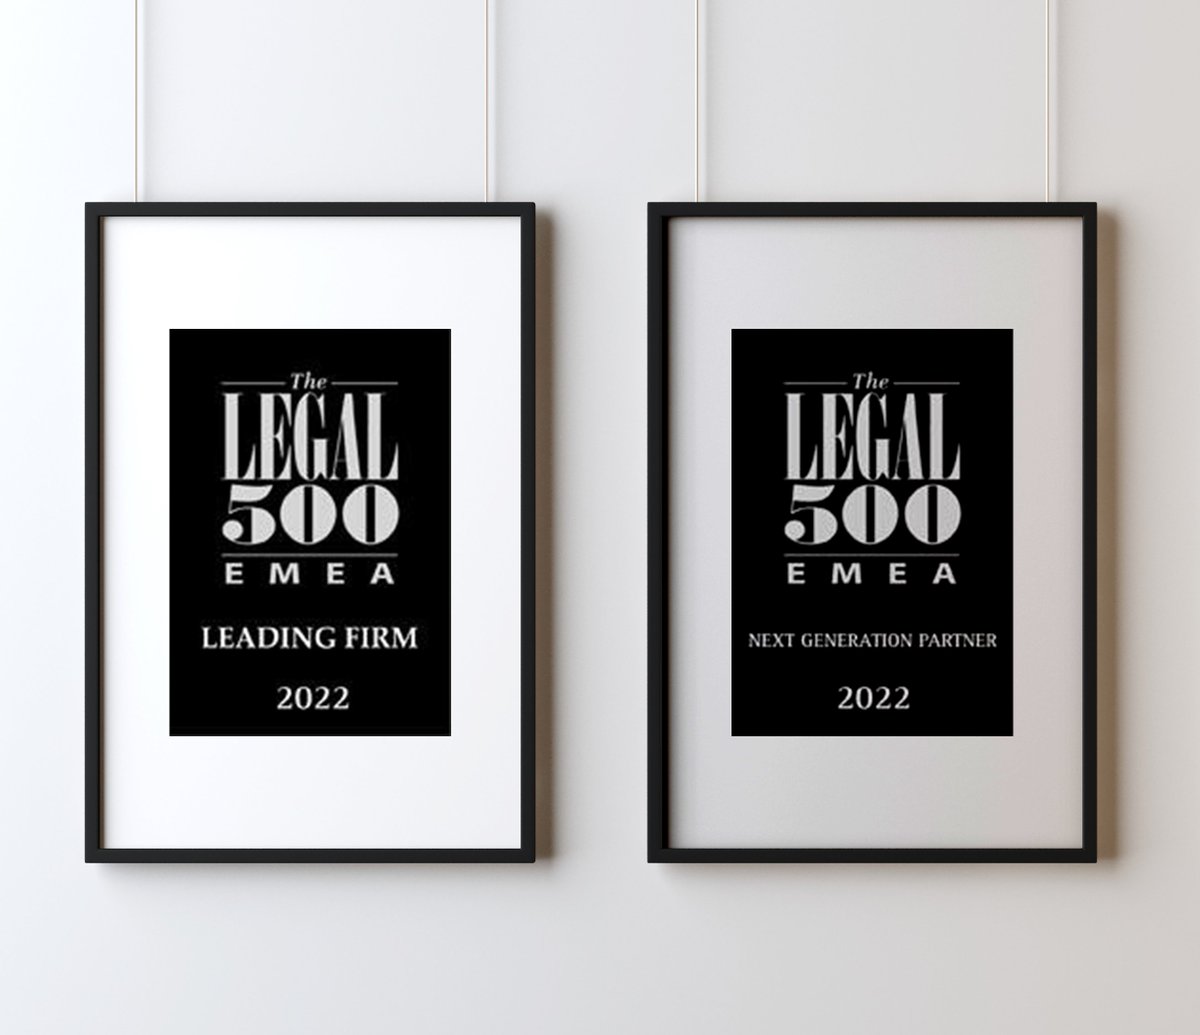 We are honoured to receive these recognitions! 

#naegelelaw #Legal500 #EMEA2022 #LeadingFirm #NextGenerationPartner #Liechtenstein #BuildingBridges #law #technology